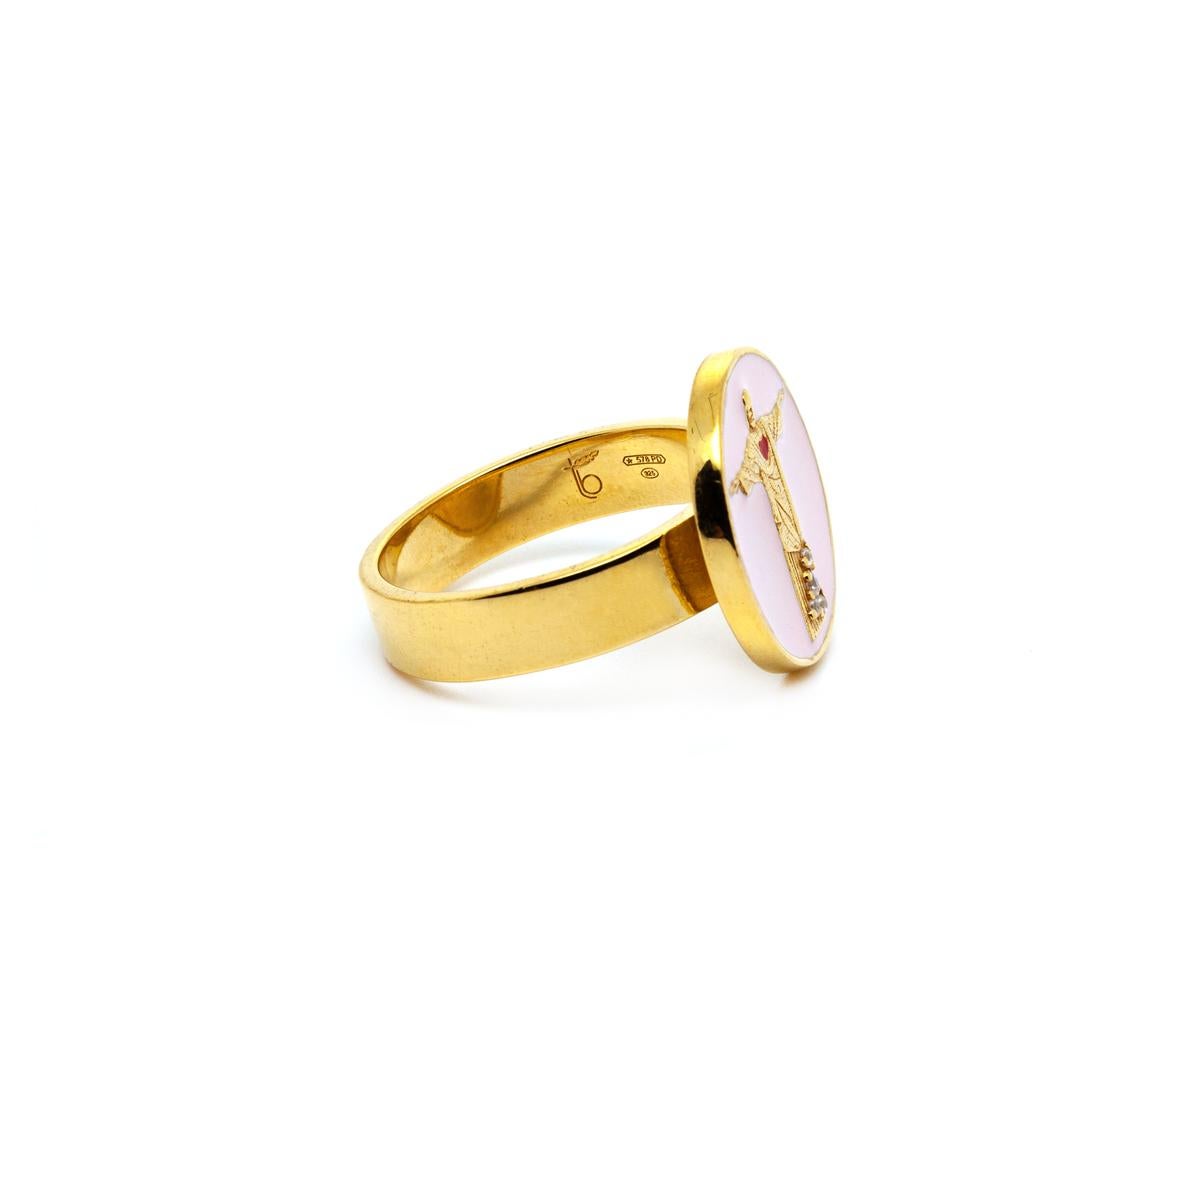 Corcovado ring in 925 gold-plated sterling silver, hand-enameled with pink enamel.

The Corcovado collection, featuring a unique, innovative and genderless design, consists of enameled pendants and rings made of 925 18-karat gold-plated sterling